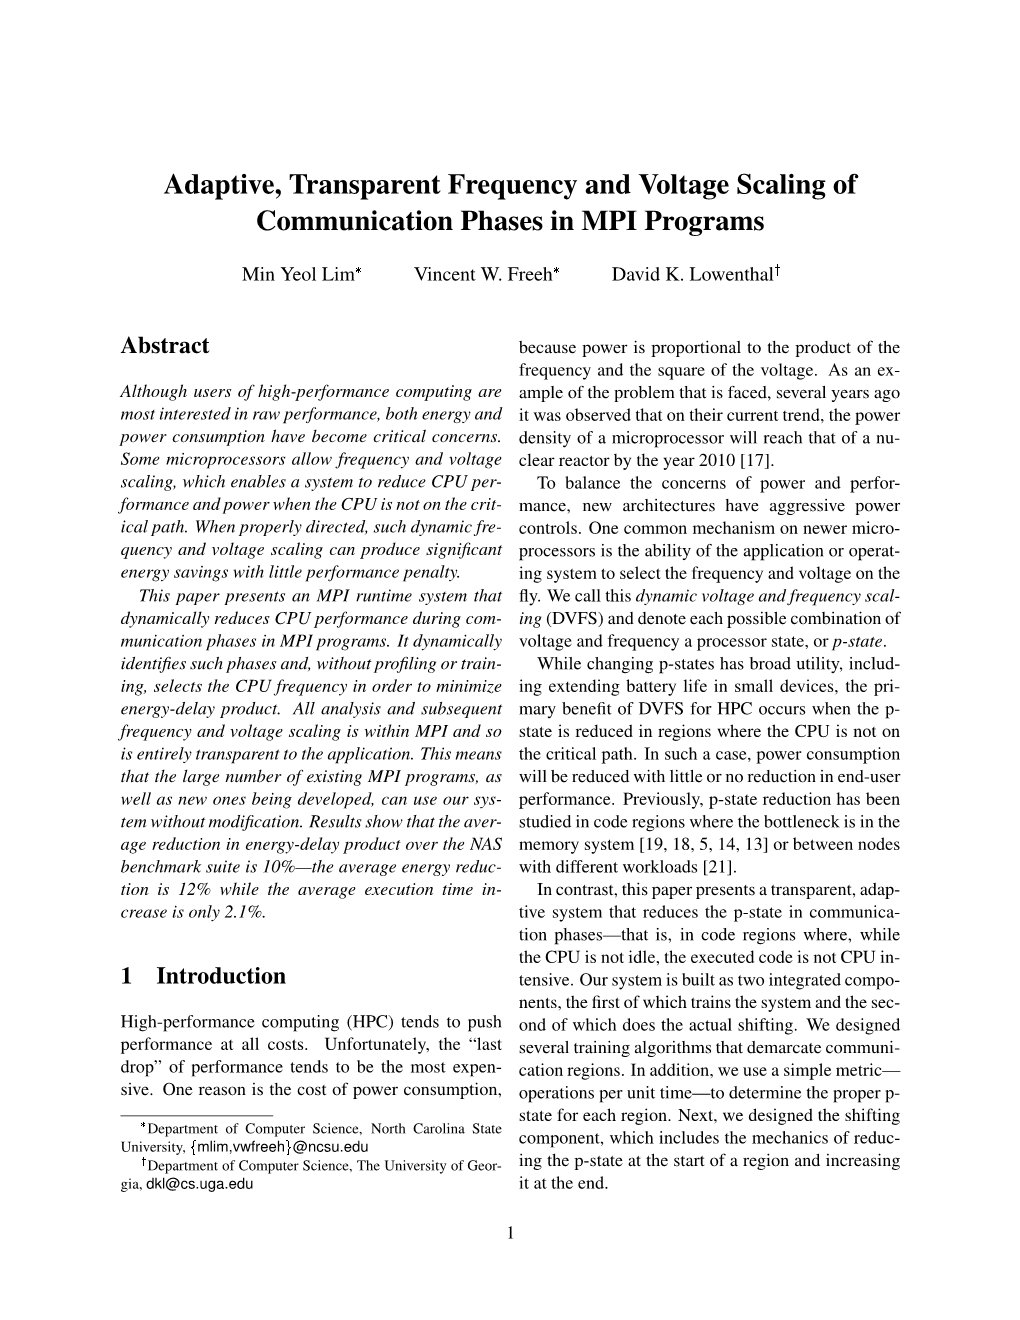 Adaptive, Transparent Frequency and Voltage Scaling of Communication